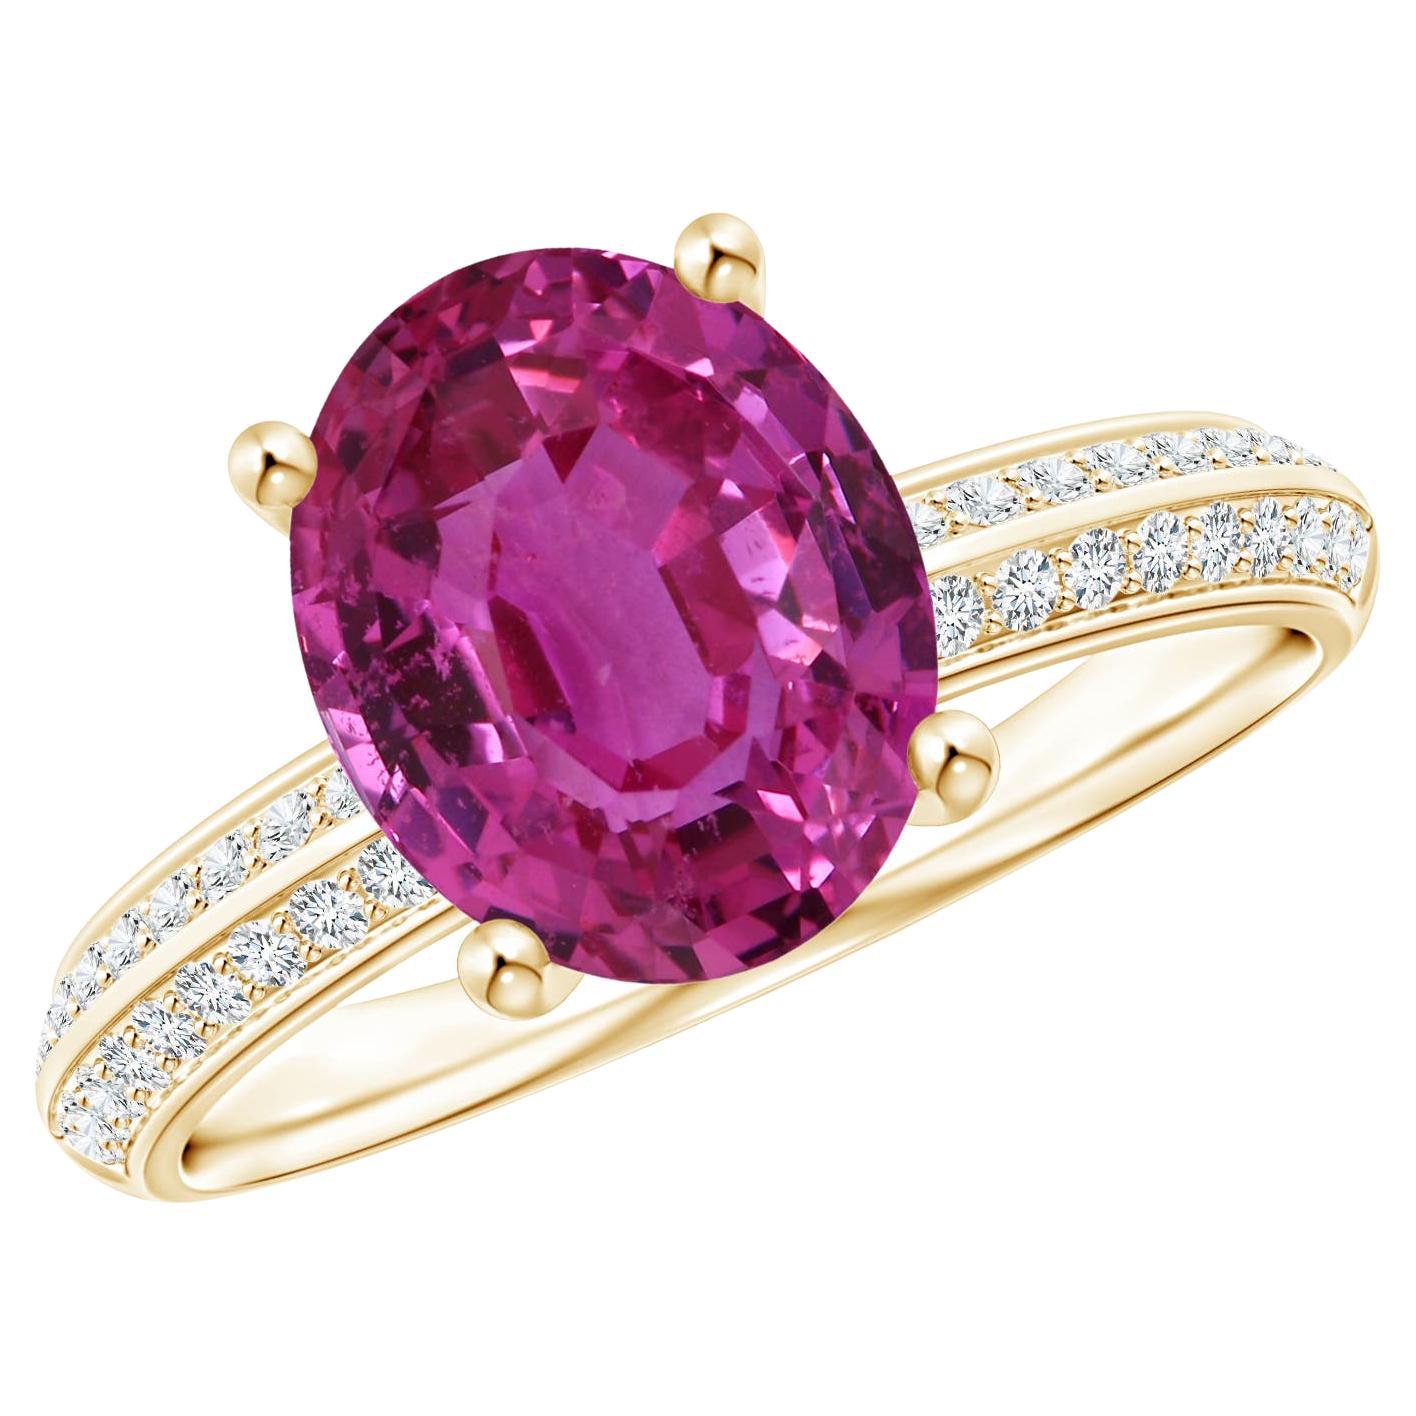 For Sale:  Angara Gia Certified Natural Classic Pink Sapphire Ring in Yellow Gold